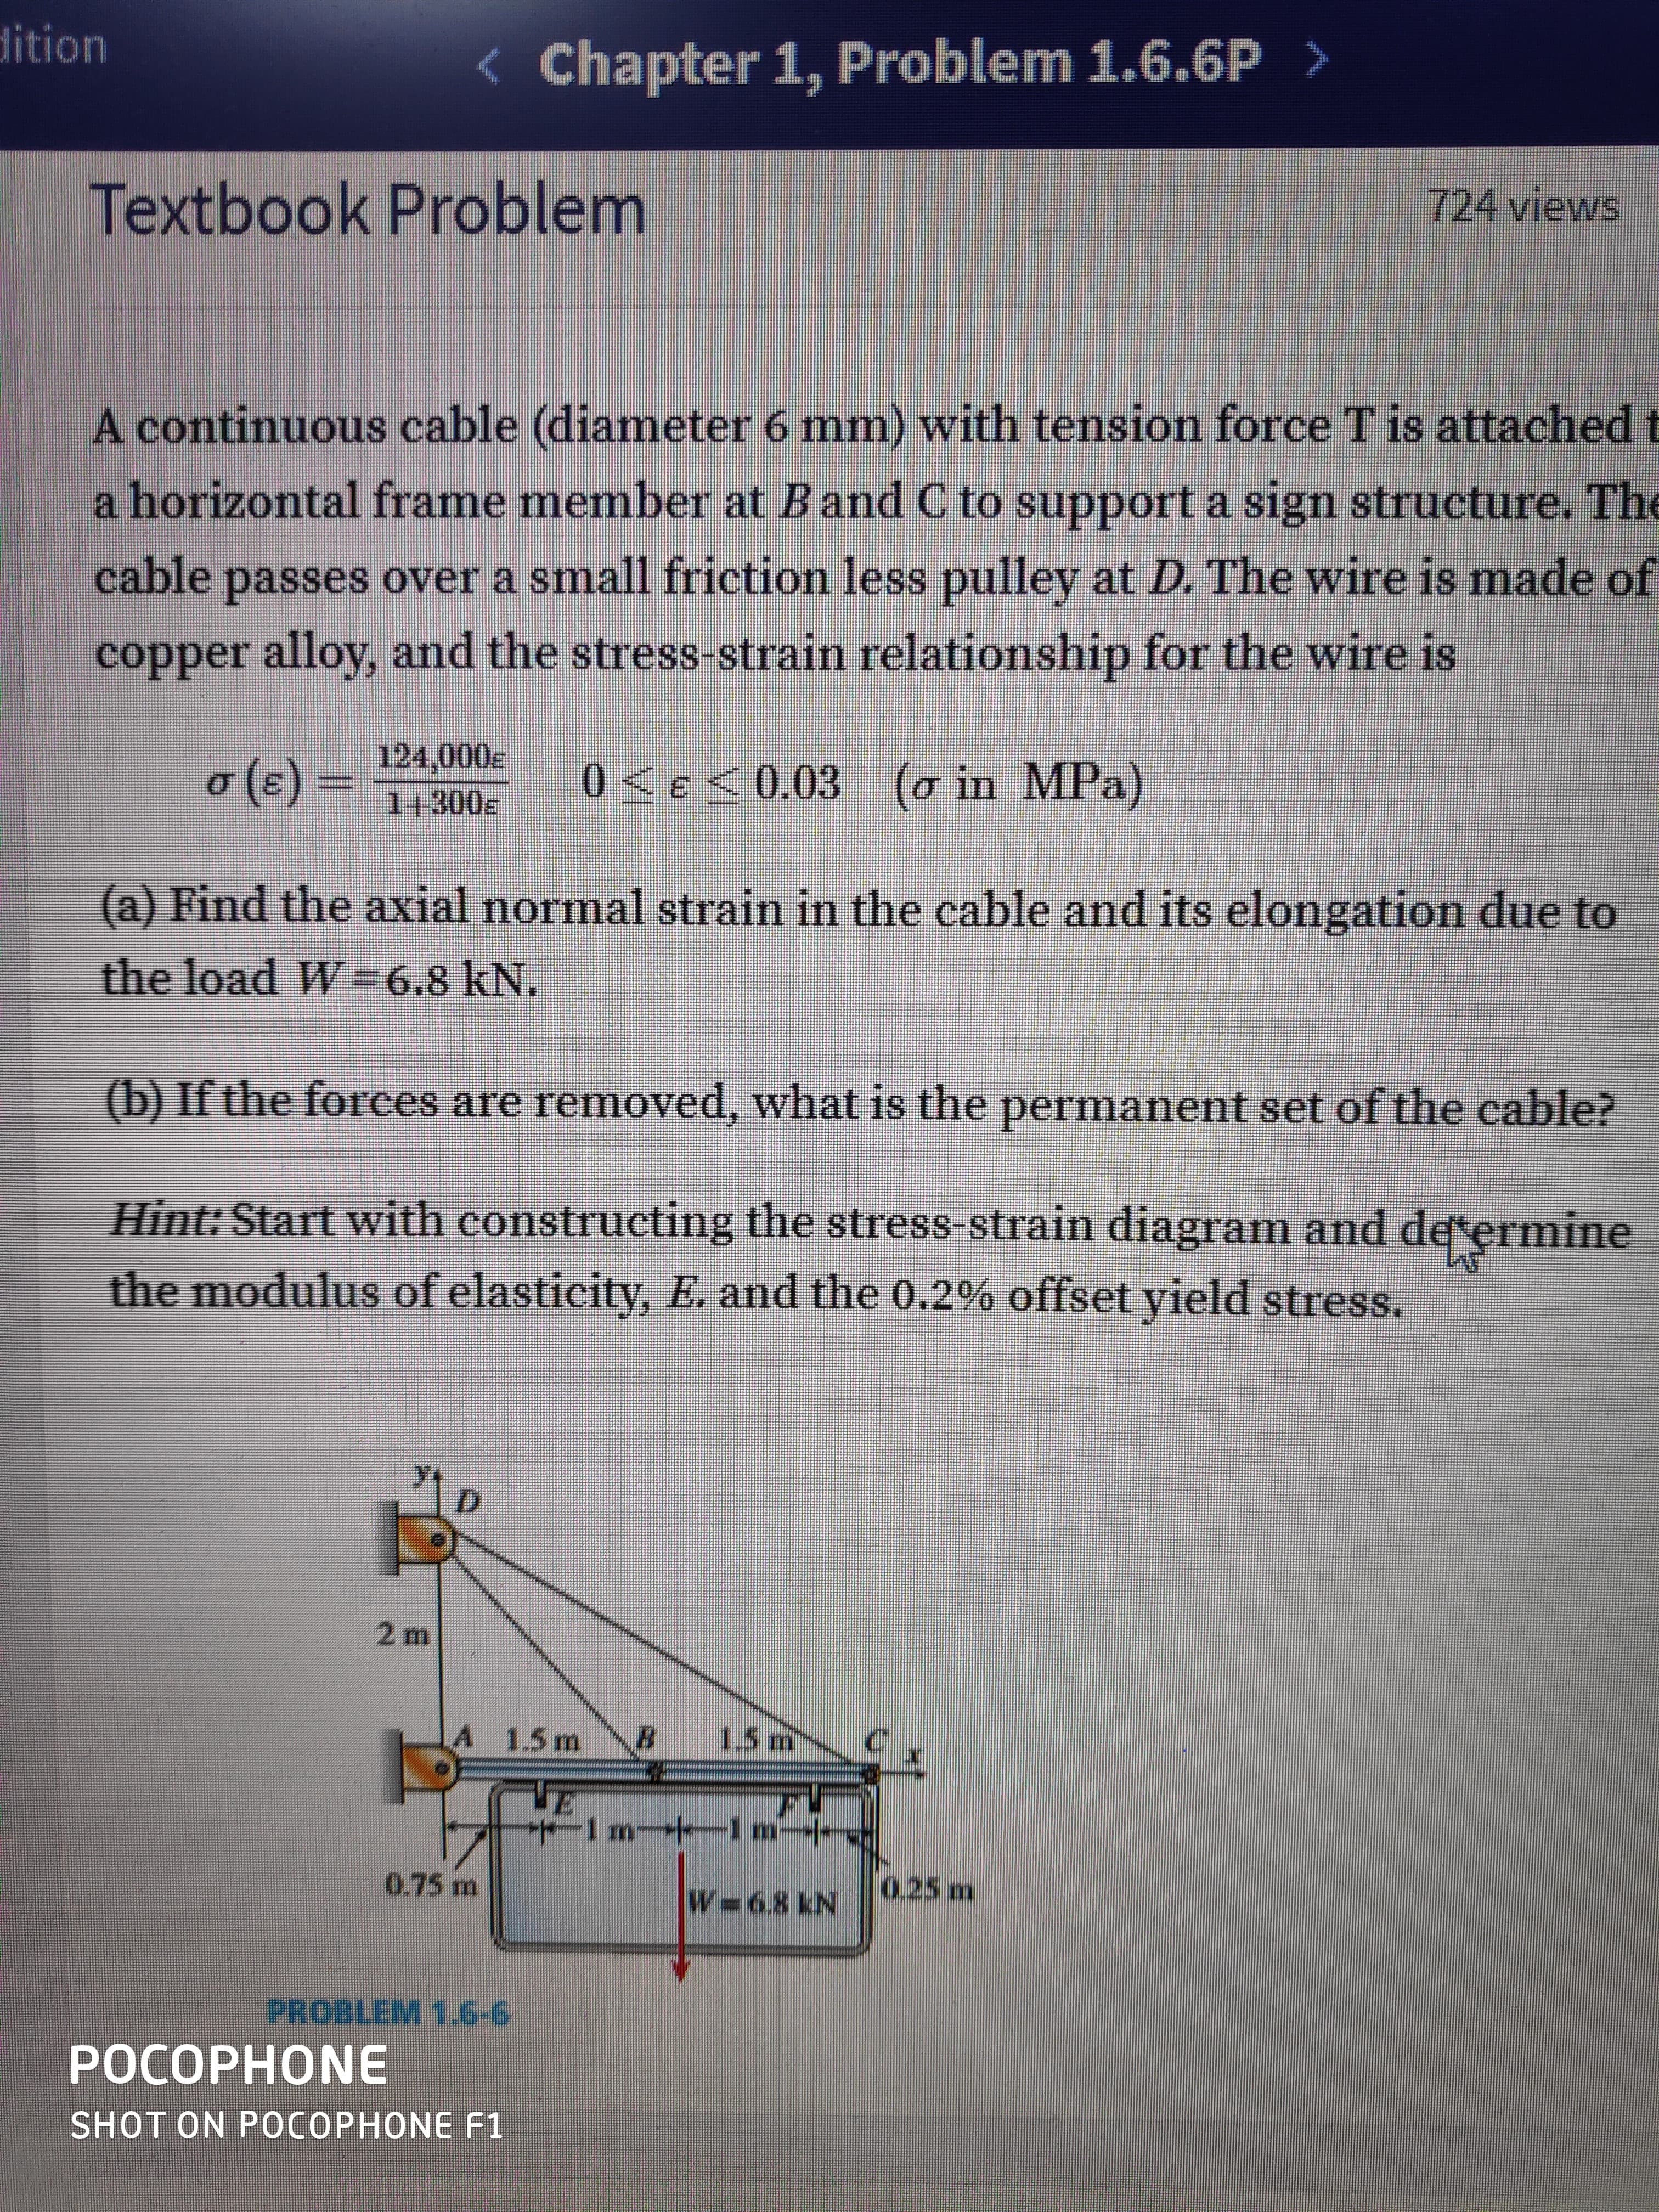 dition
< Chapter 1, Problem 1.6.6P >
Textbook Problem
724 views
A continuous cable (diameter 6 mm) with tension force T is attachedt
a horizontal frame member at Band C to support a sign structure. The
cable passes over a small friction less pulley at D. The wire is made of
copper alloy, and the stress-strain relationship for the wire is
o3=
(c)
124,000e
14300E
0<e<0.03 (o in MPa)
(a) Find the axial normal strain in the cable and its elongation due to
the load W =6.8 kN.
(b) If the forces are removed, what is the permanent set of the cable?
Hint: Start with constructing the stress-strain diagram and determine
the modulus of elasticity, E. and the 0.2% offset yield stress.
A 1.5m
1.5 m
m 1 m--
0.75 m
0.25 m
W 6.8 kN
PROBLEM 1.6-6
РОСОРНОNE
SHOT ON POСОРНONE F1
